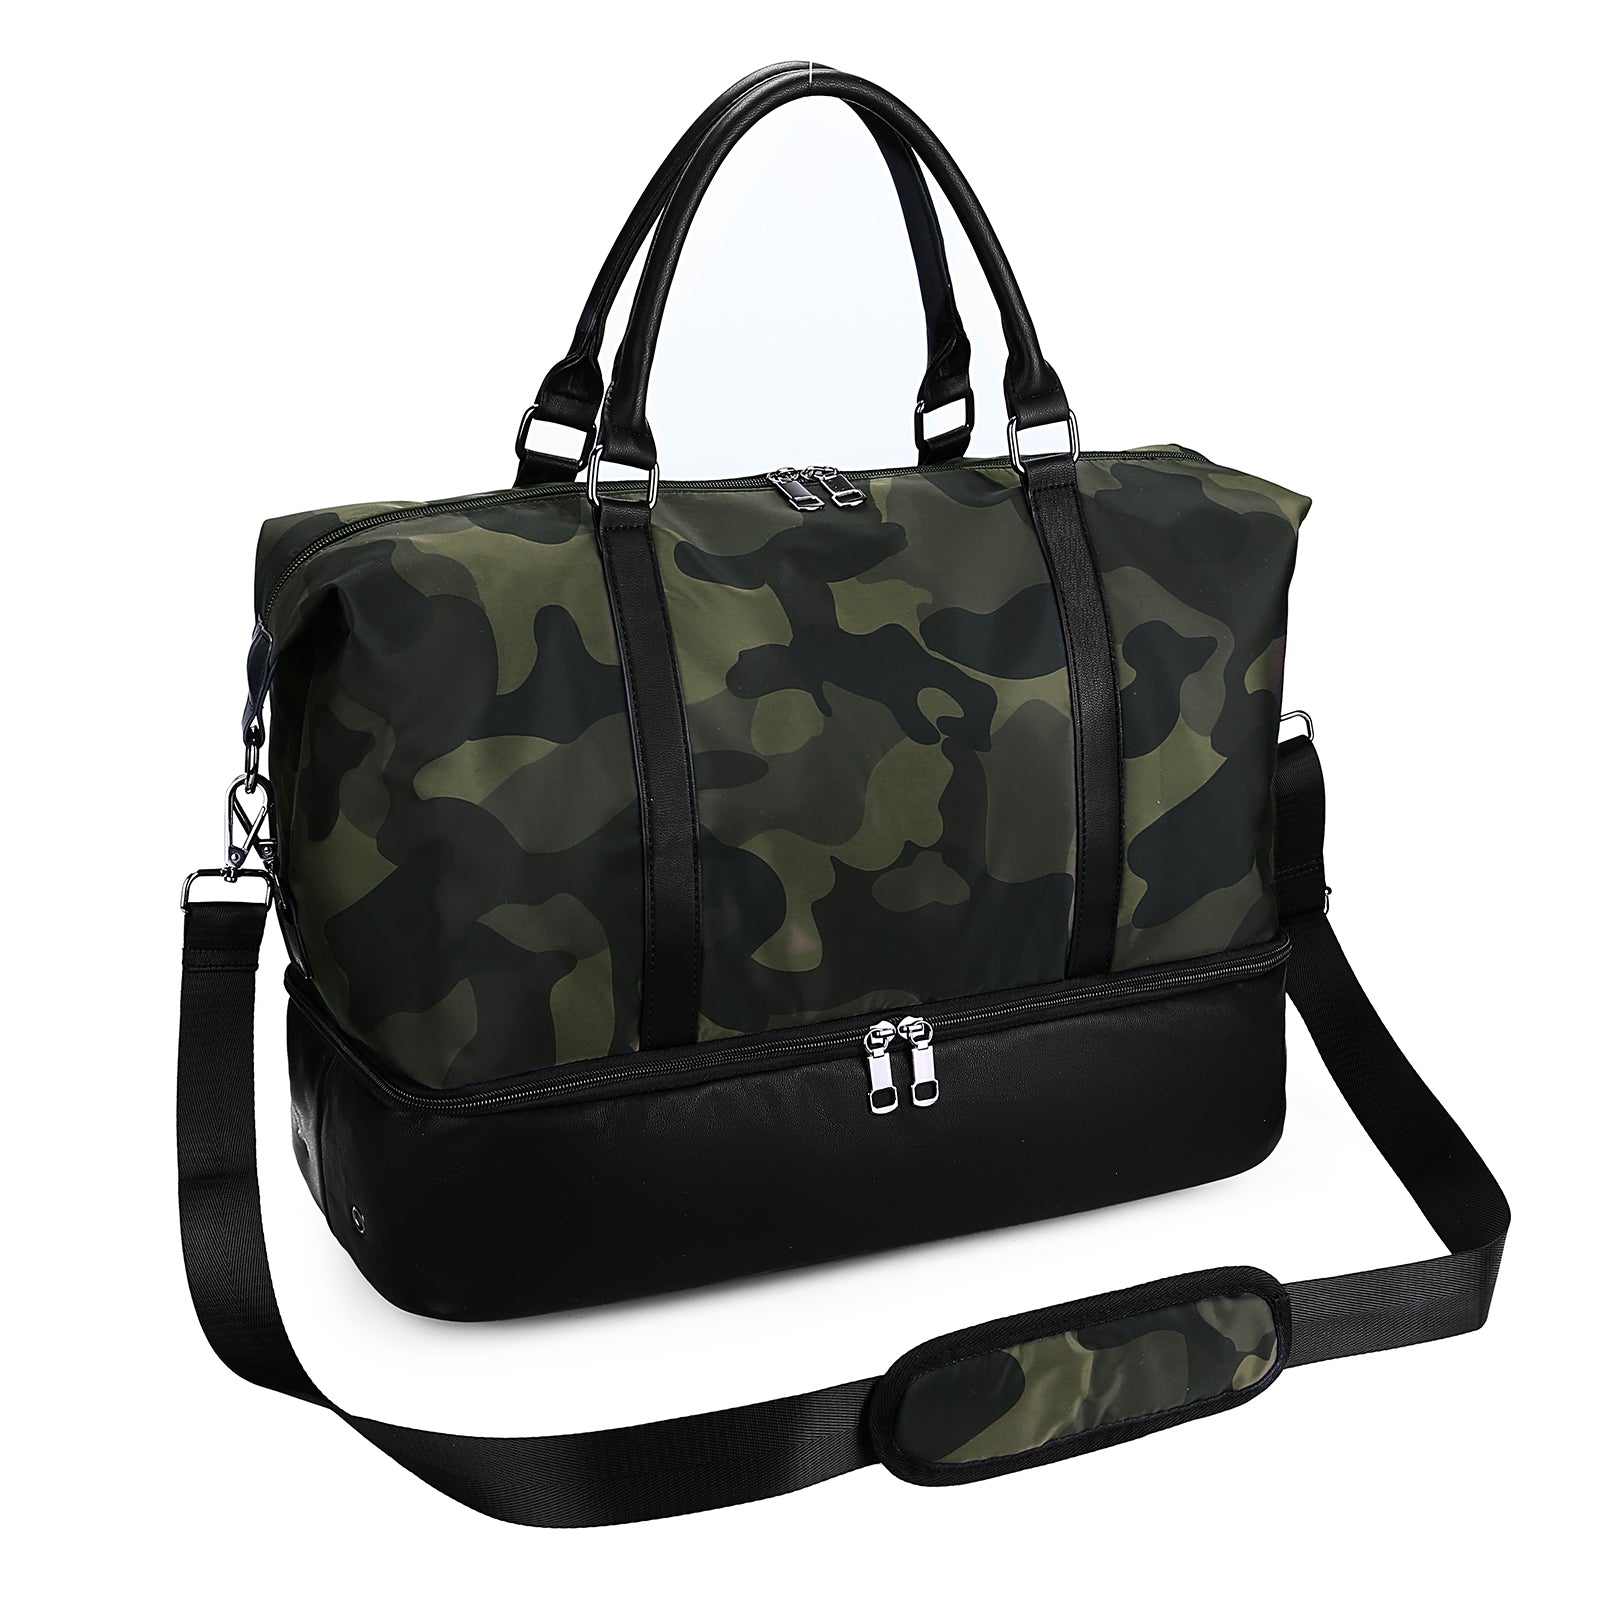 BYBBA Balos Tote in Jules Camo